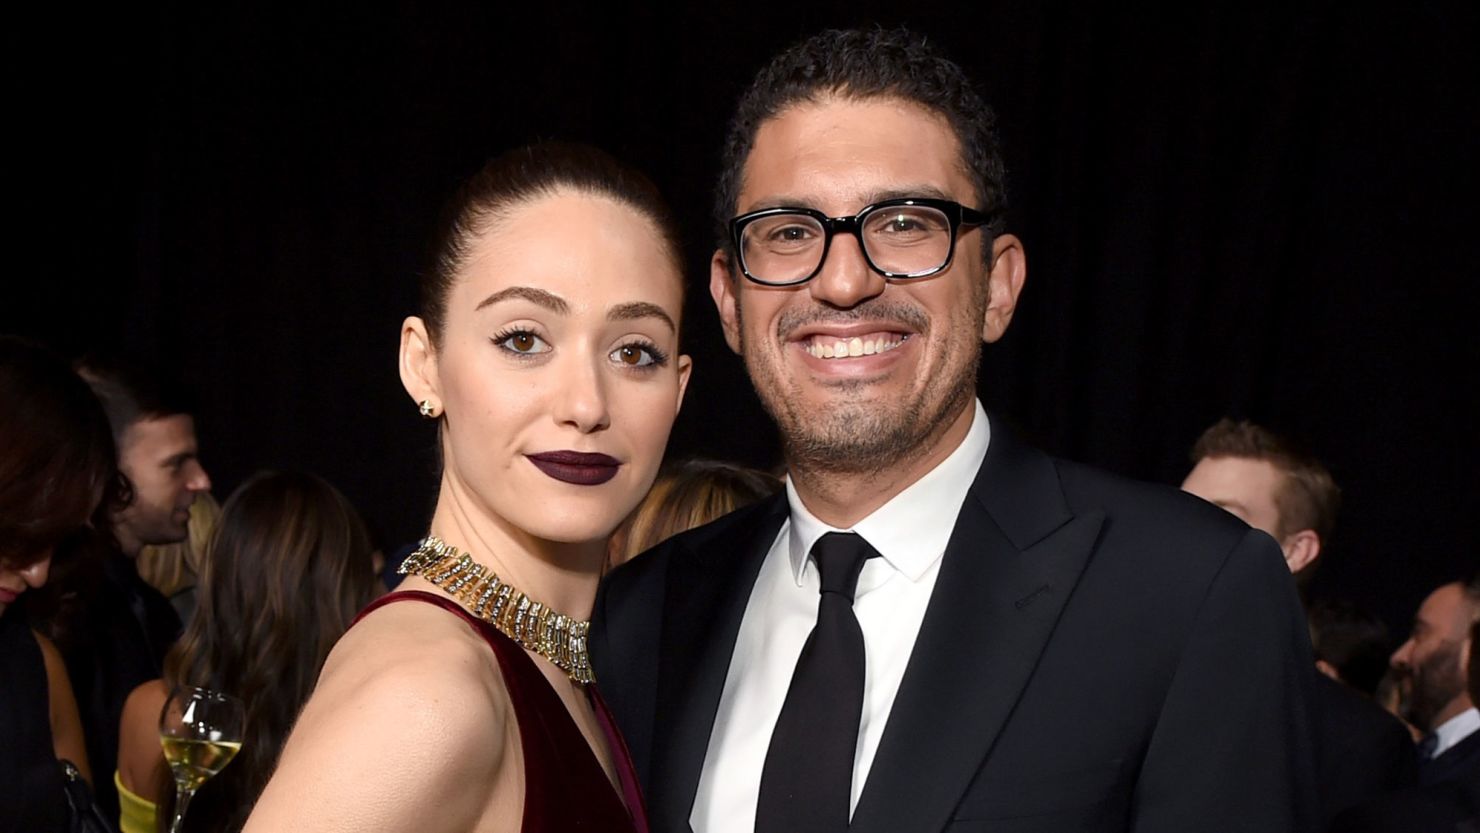 (From left) Emmy Rossum and Sam Esmail in 2019 at the Critics' Choice Awards in Santa Monica. 